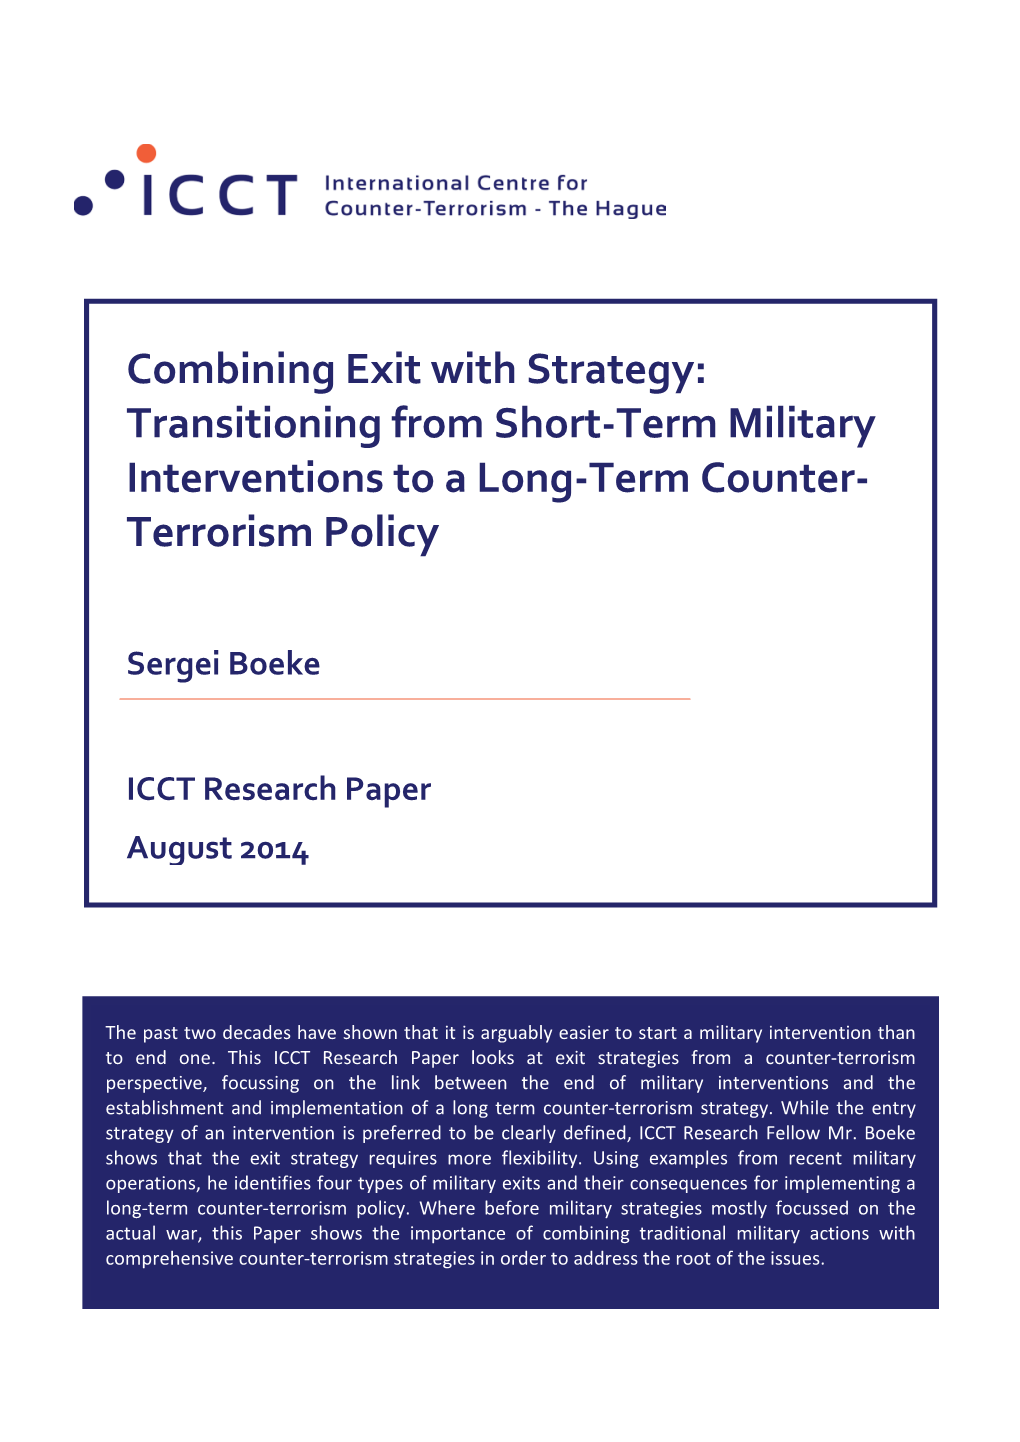 Transitioning from Short-Term Military Interventions to a Long-Term Counter- Terrorism Policy